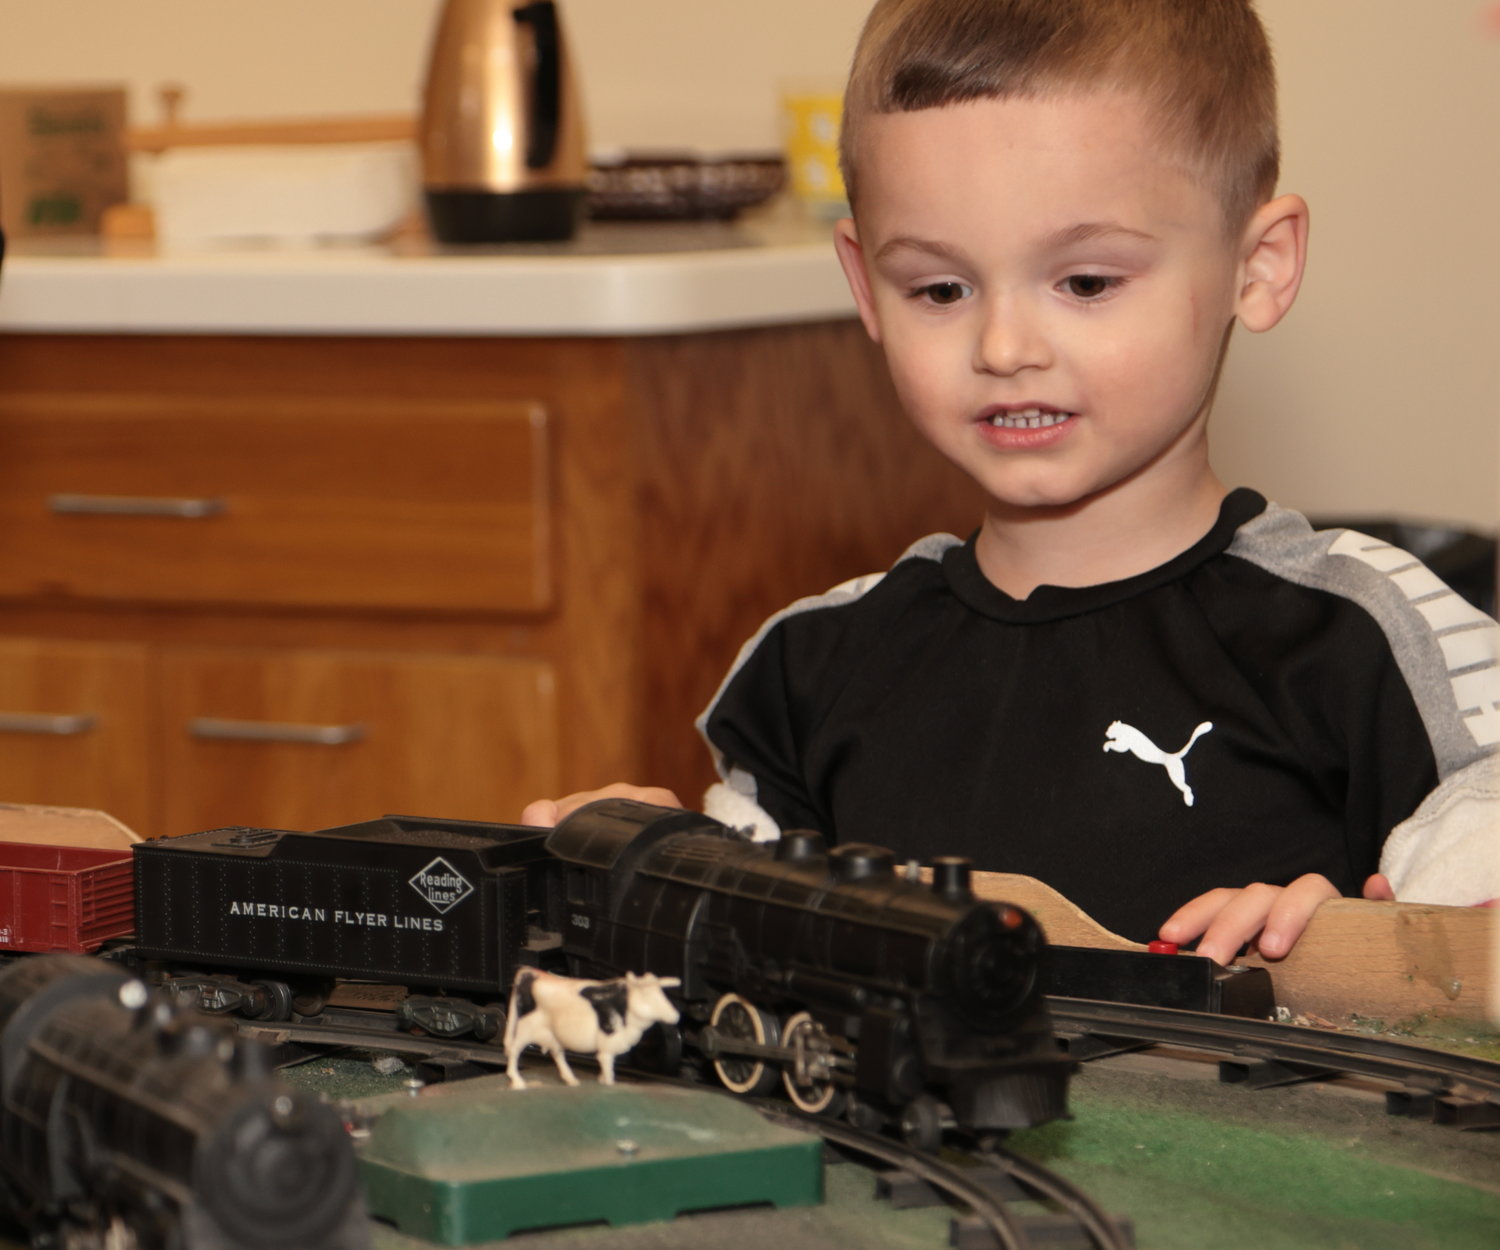 John Sladicka of Hawley brought his grandson, Noah Braxton, to the Model Train Show and Sale. Noah is moving the cow successfully out of the way of the way of the oncoming locomotive.